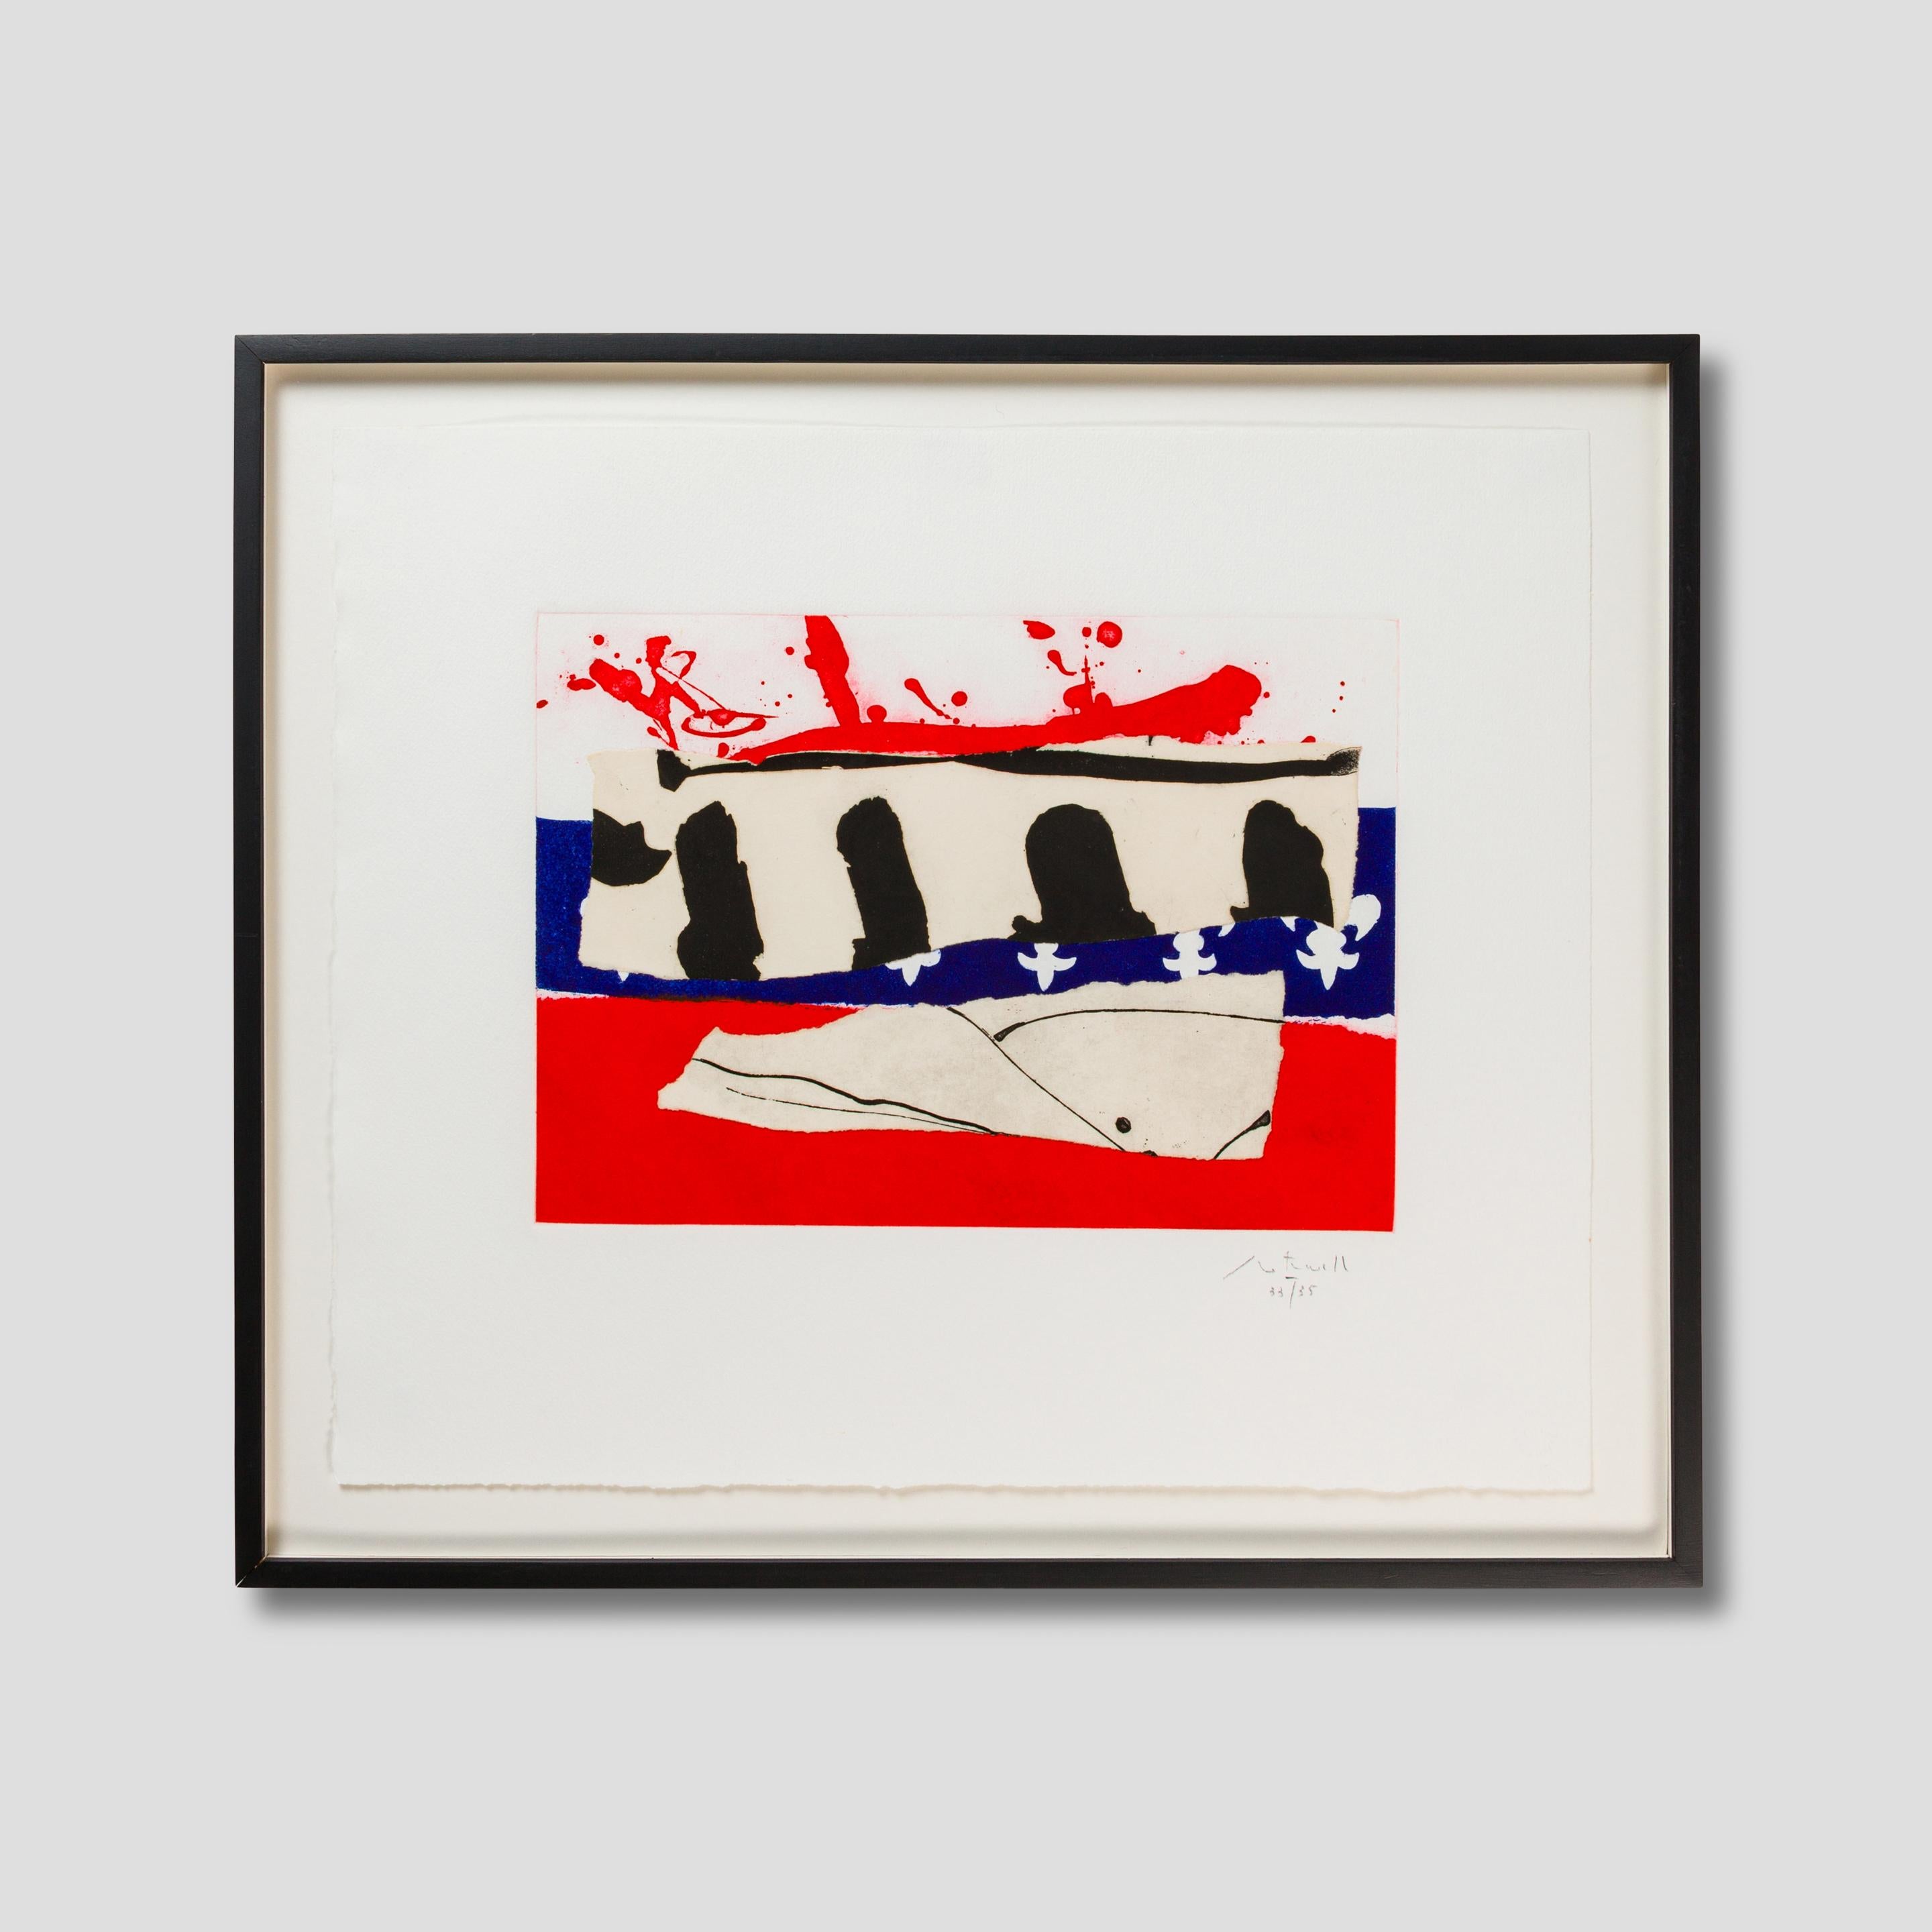 French Revolution Bicentennial Suite lll - Print by Robert Motherwell